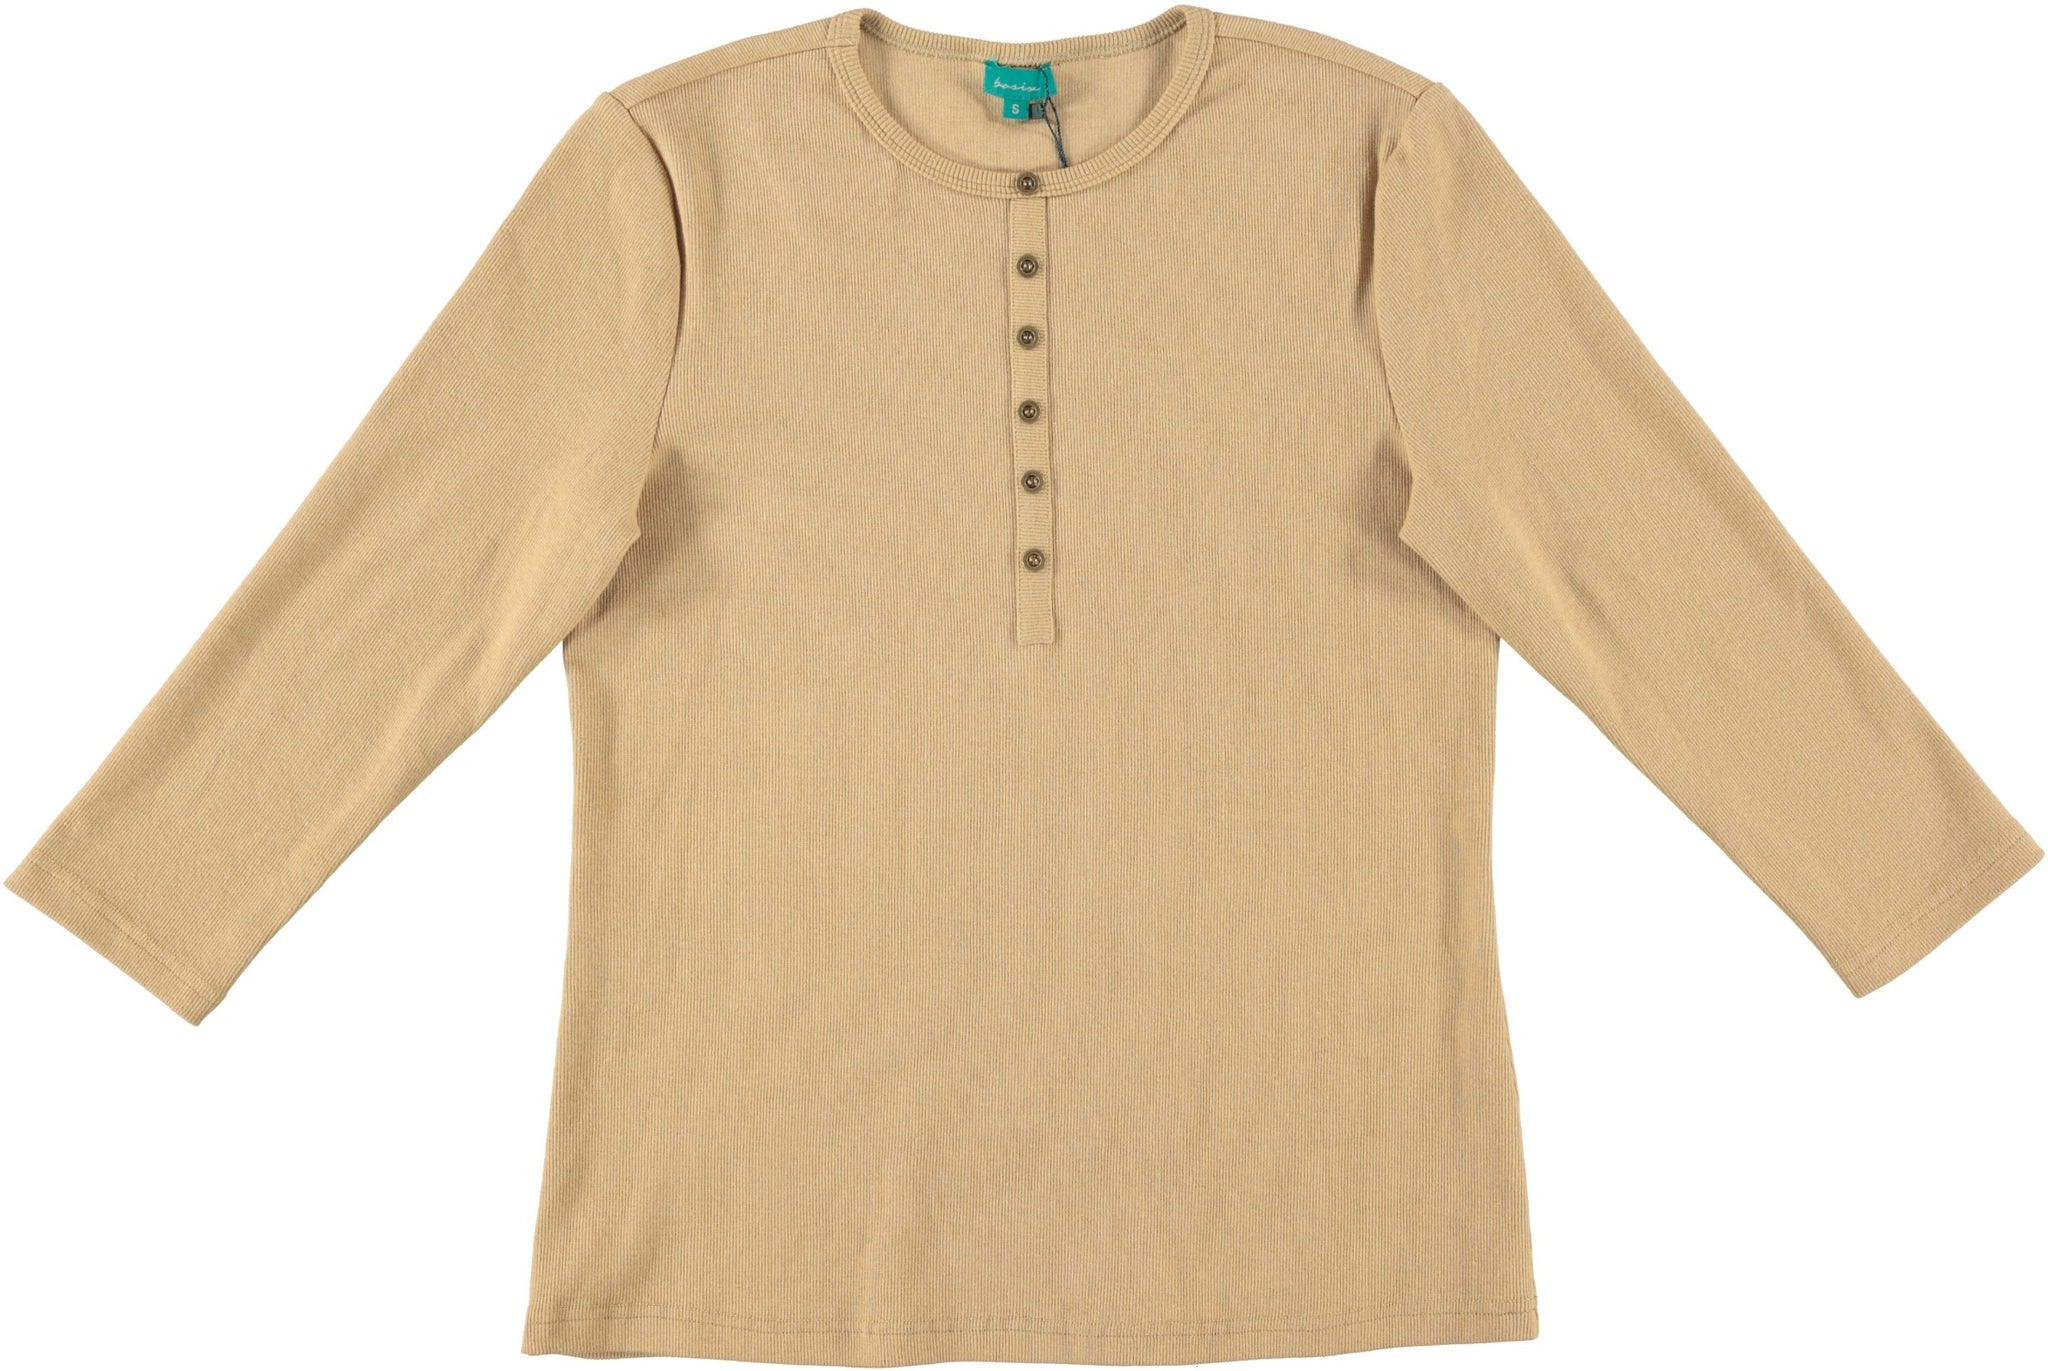 Tan Ribbed Top With Buttons